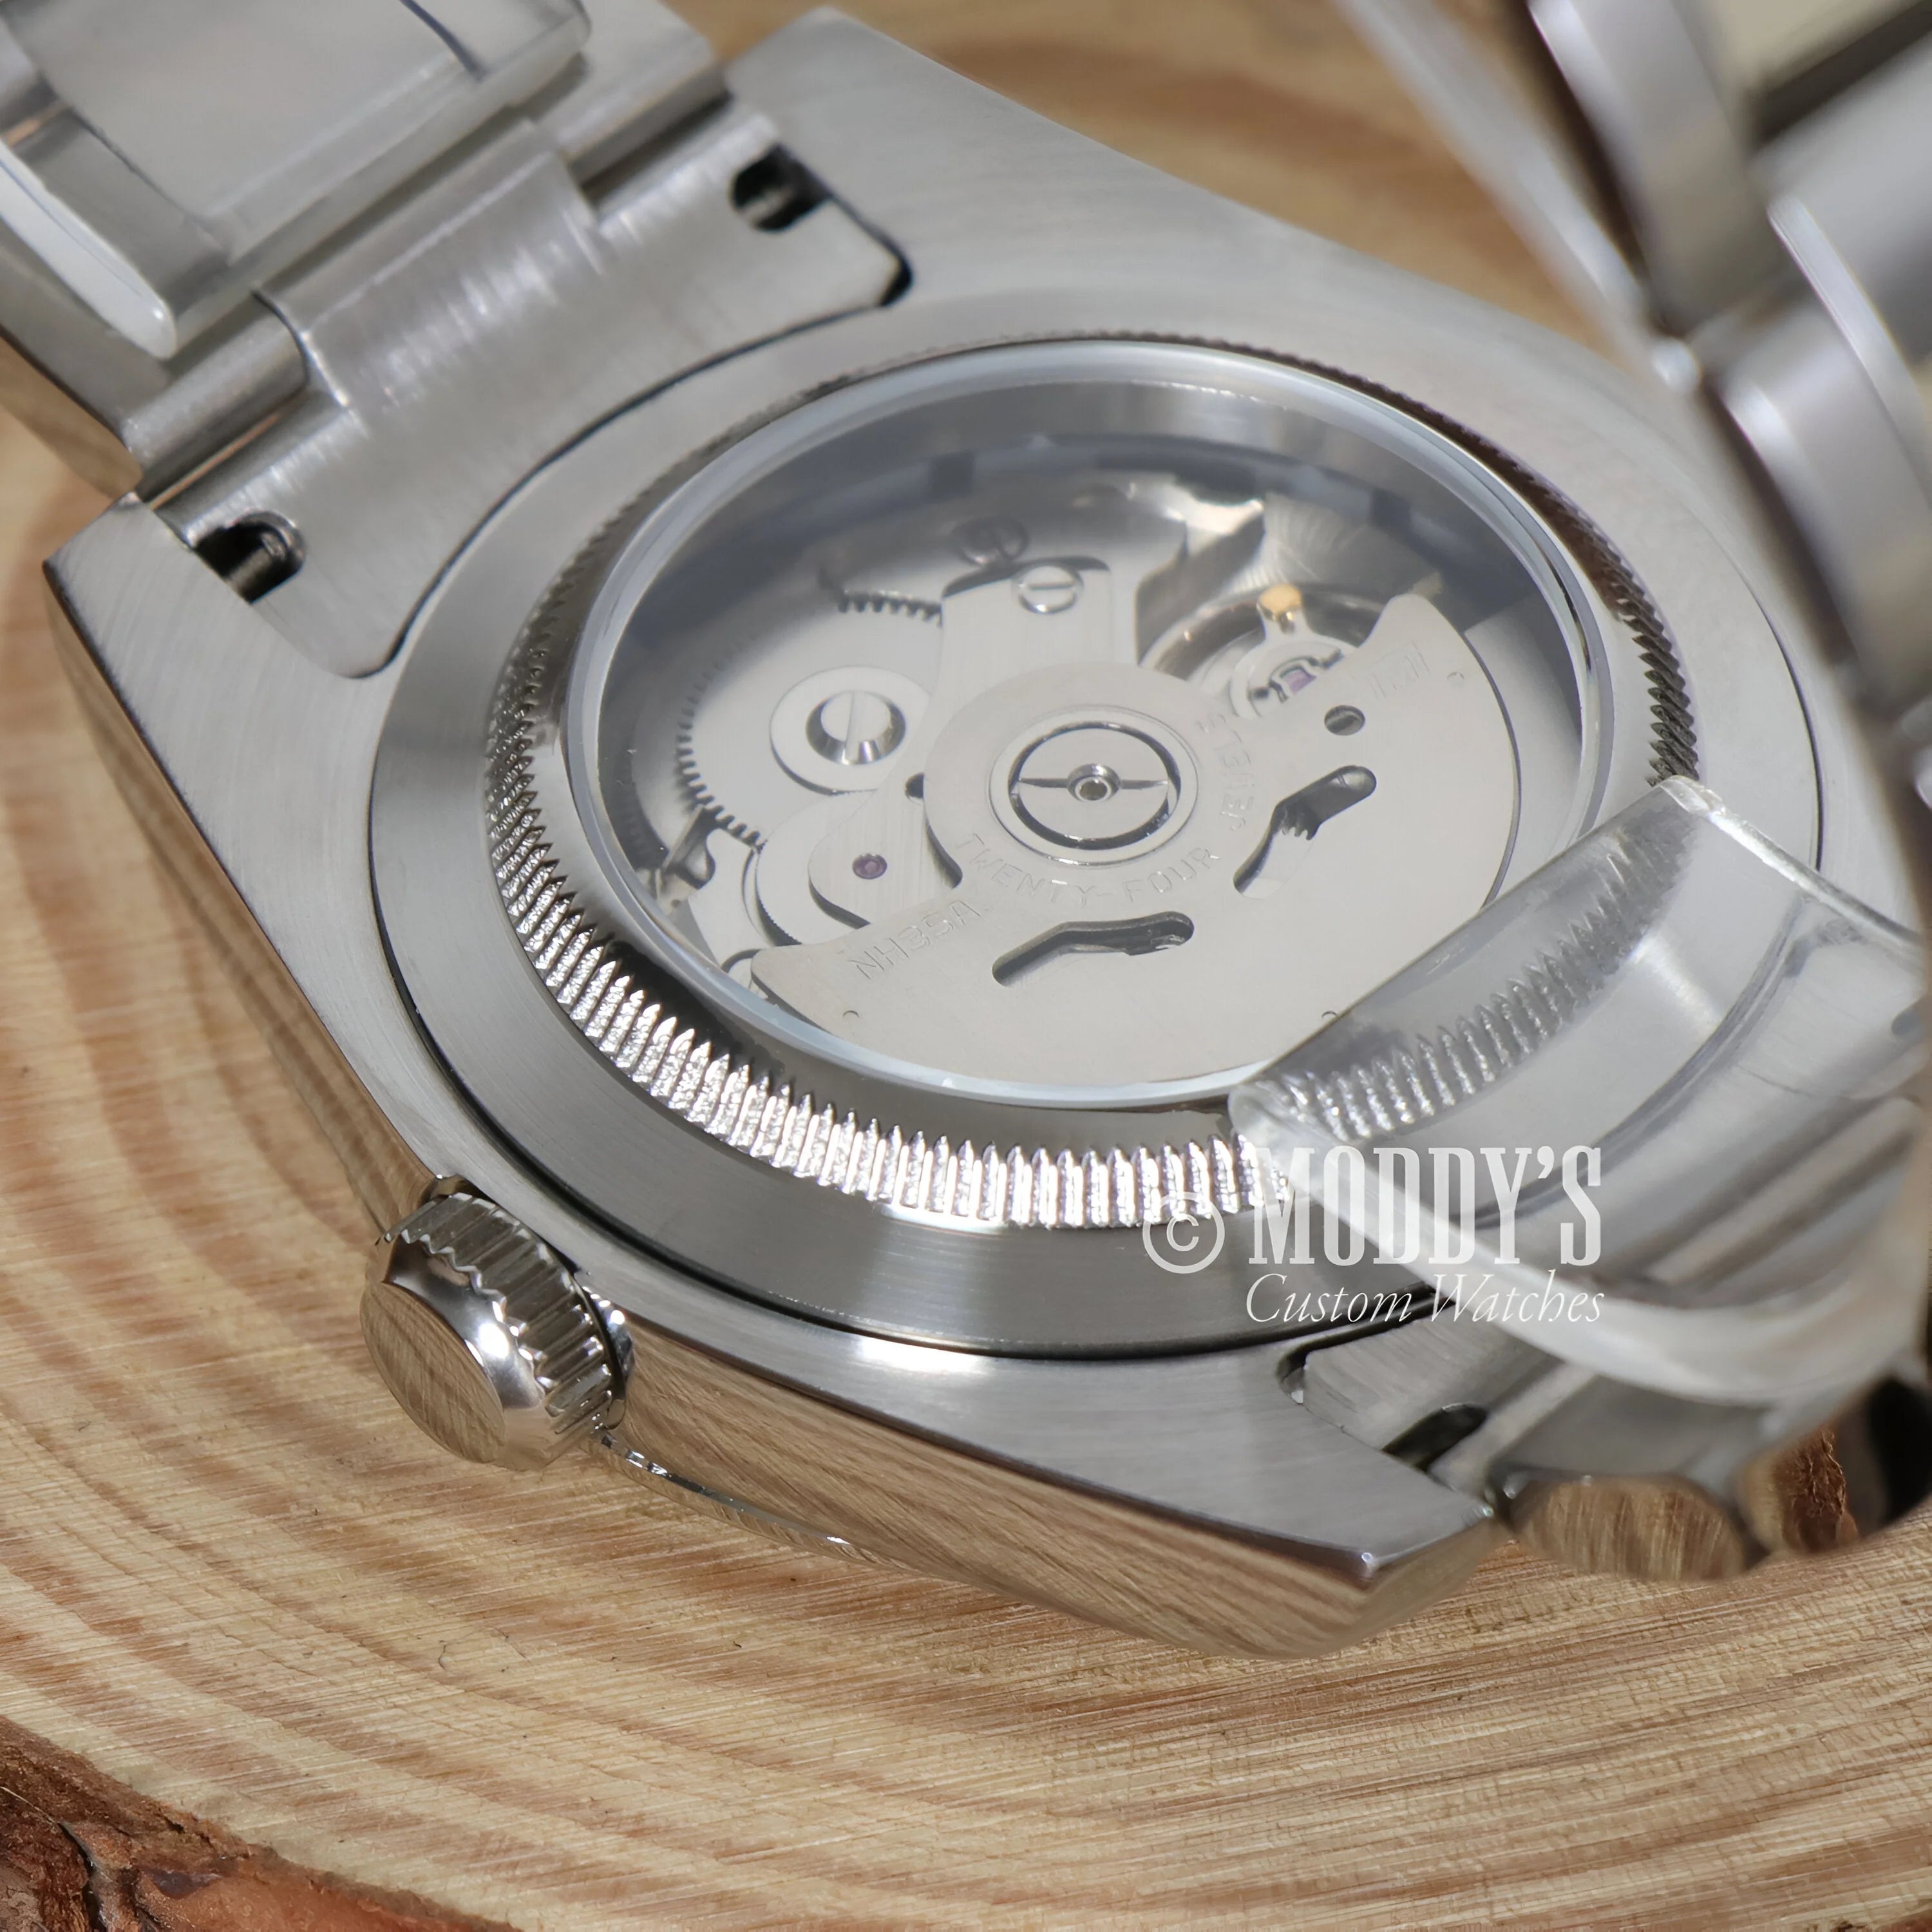 Visible Mechanical Watch Movement In Oysteiko Black Explorer Seiko Mod Oyster